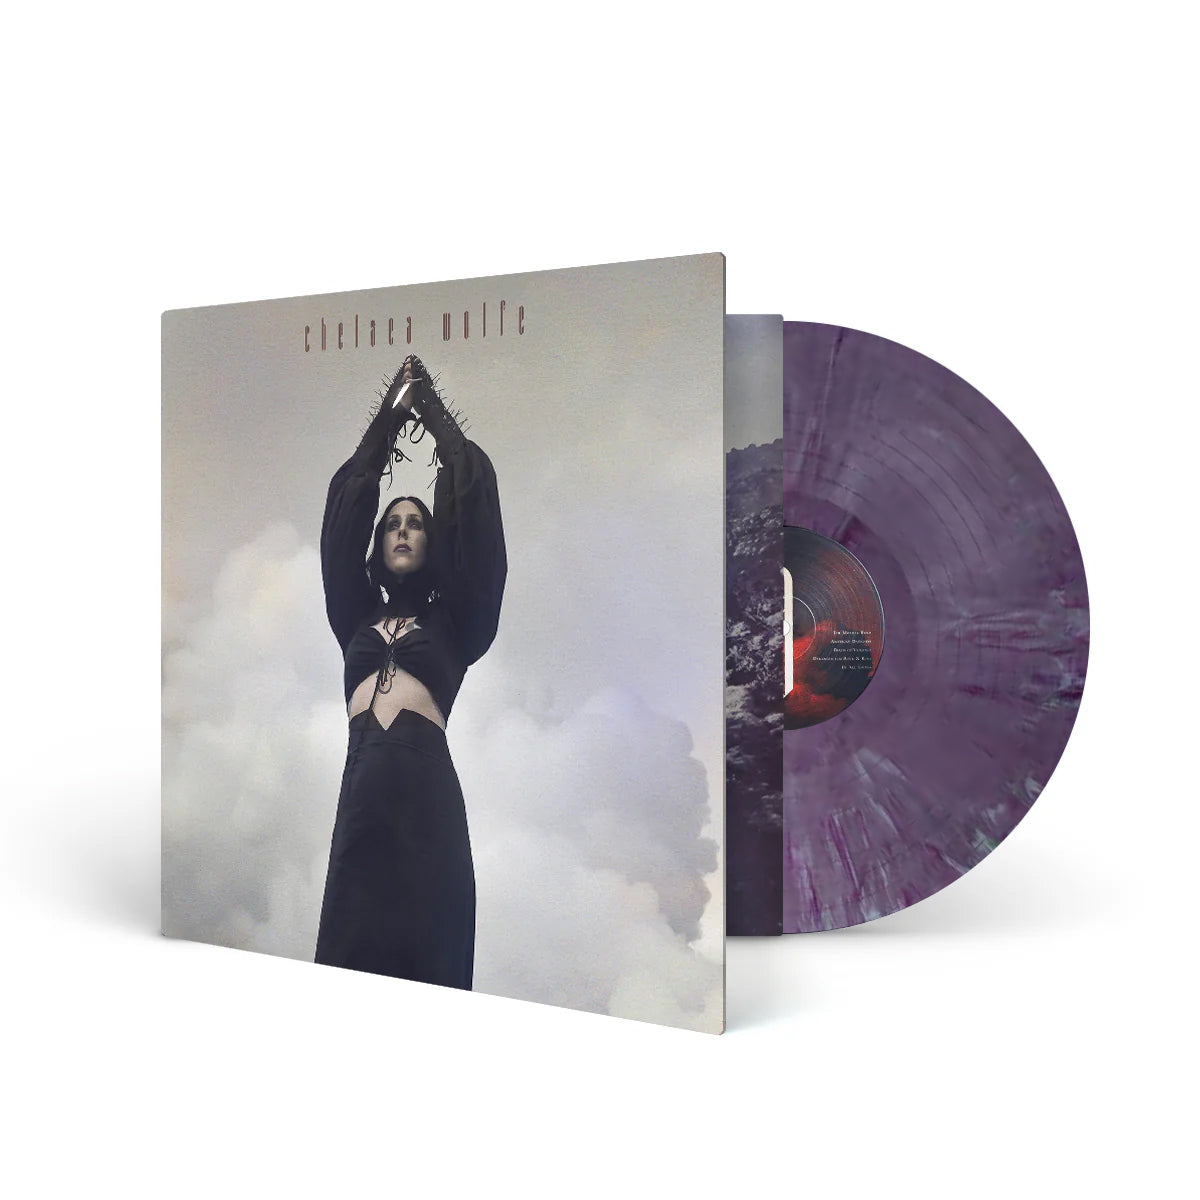 CHELSEA WOLFE "Birth Of Violence" LP